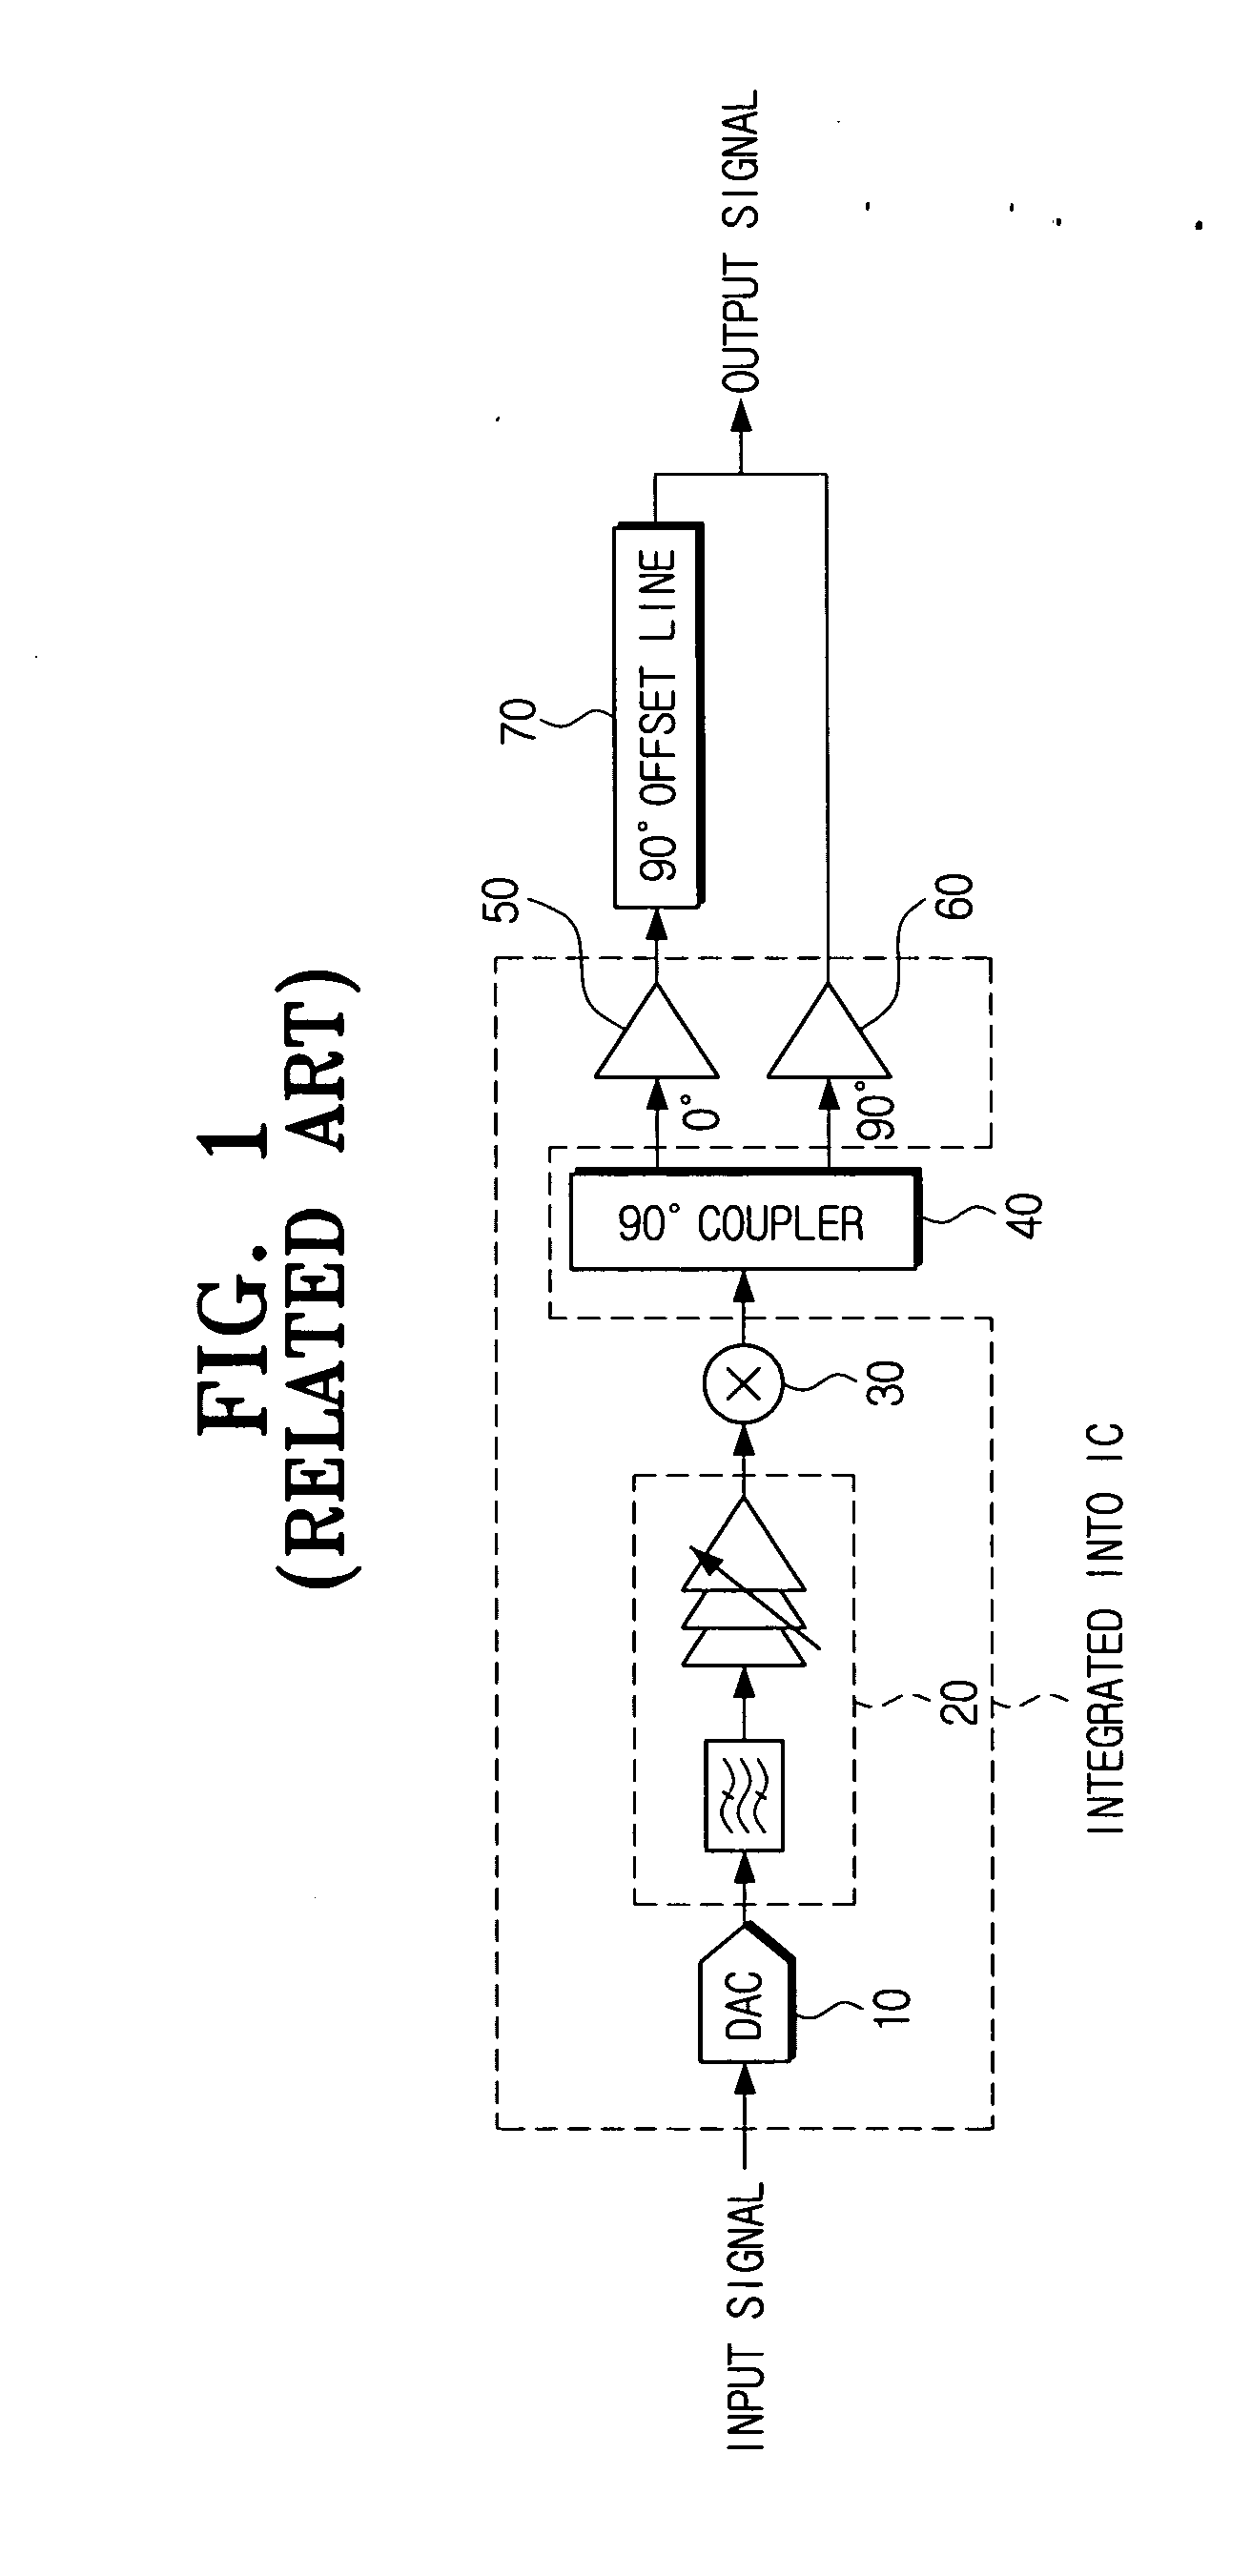 Doherty amplifier and transmitter using mixer